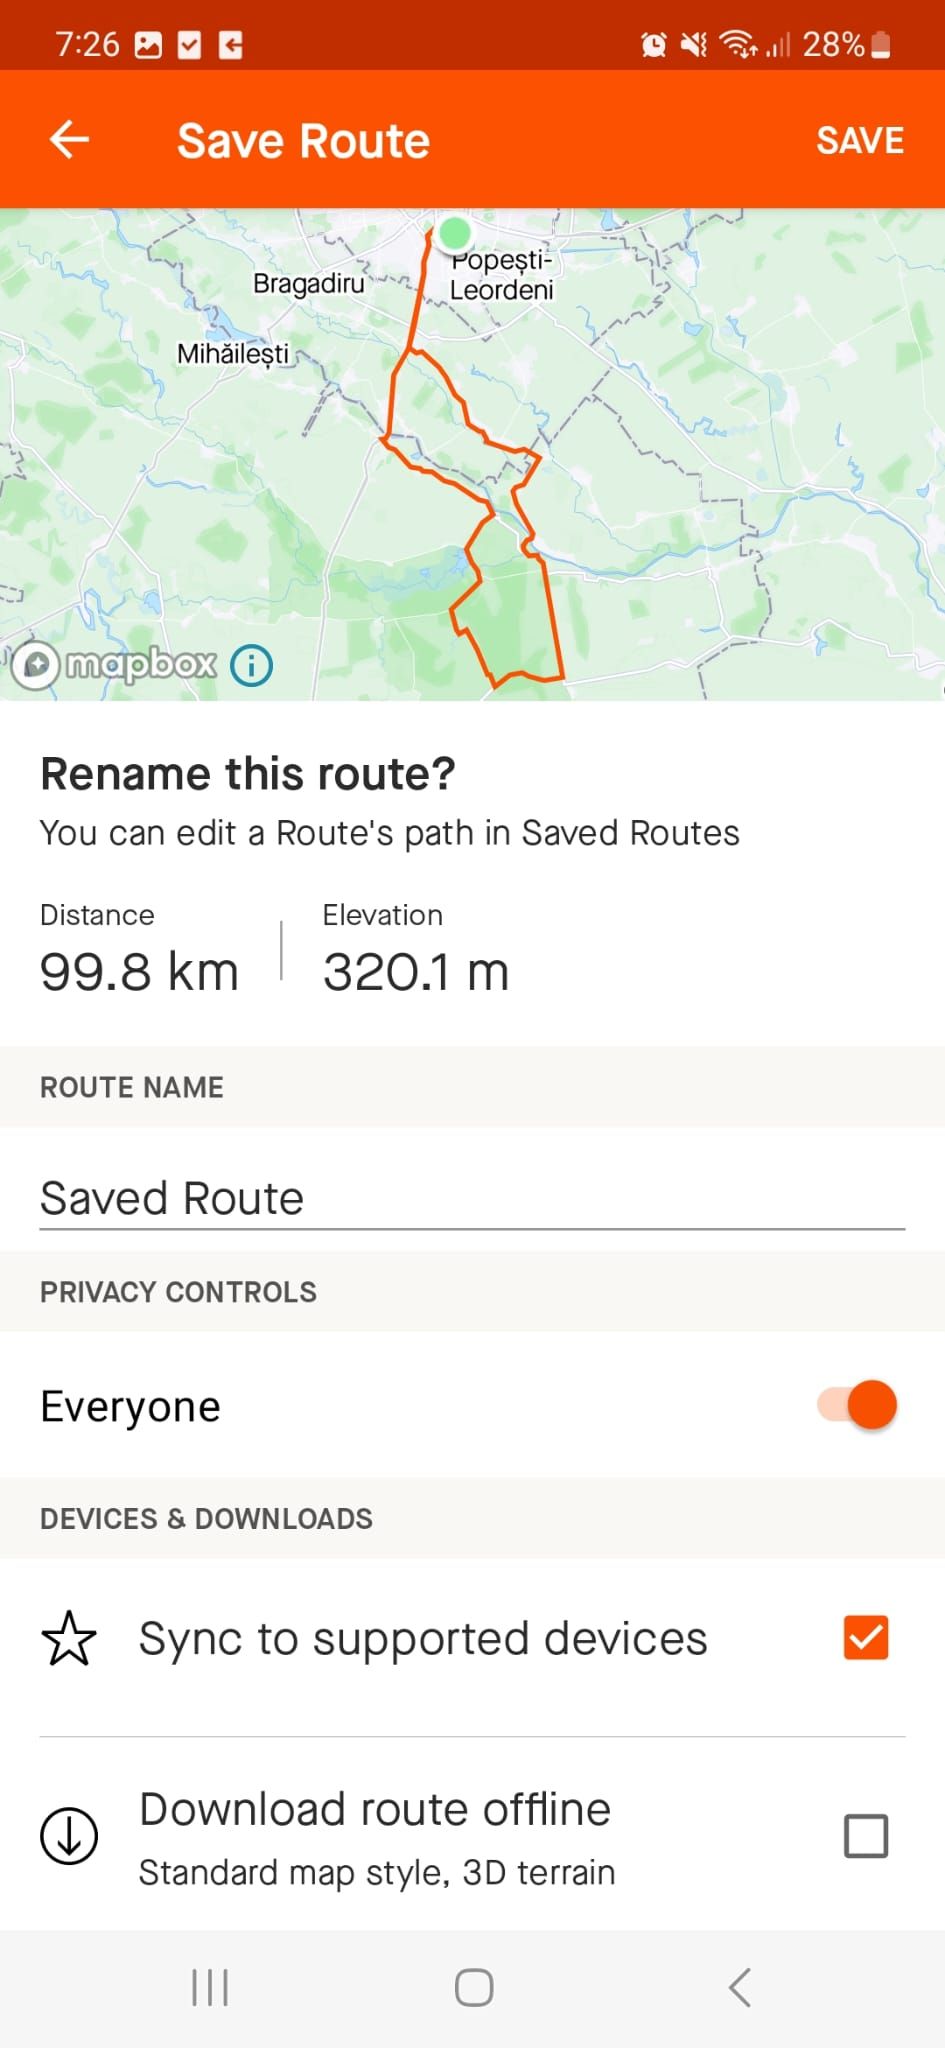 Edit the route before saving it